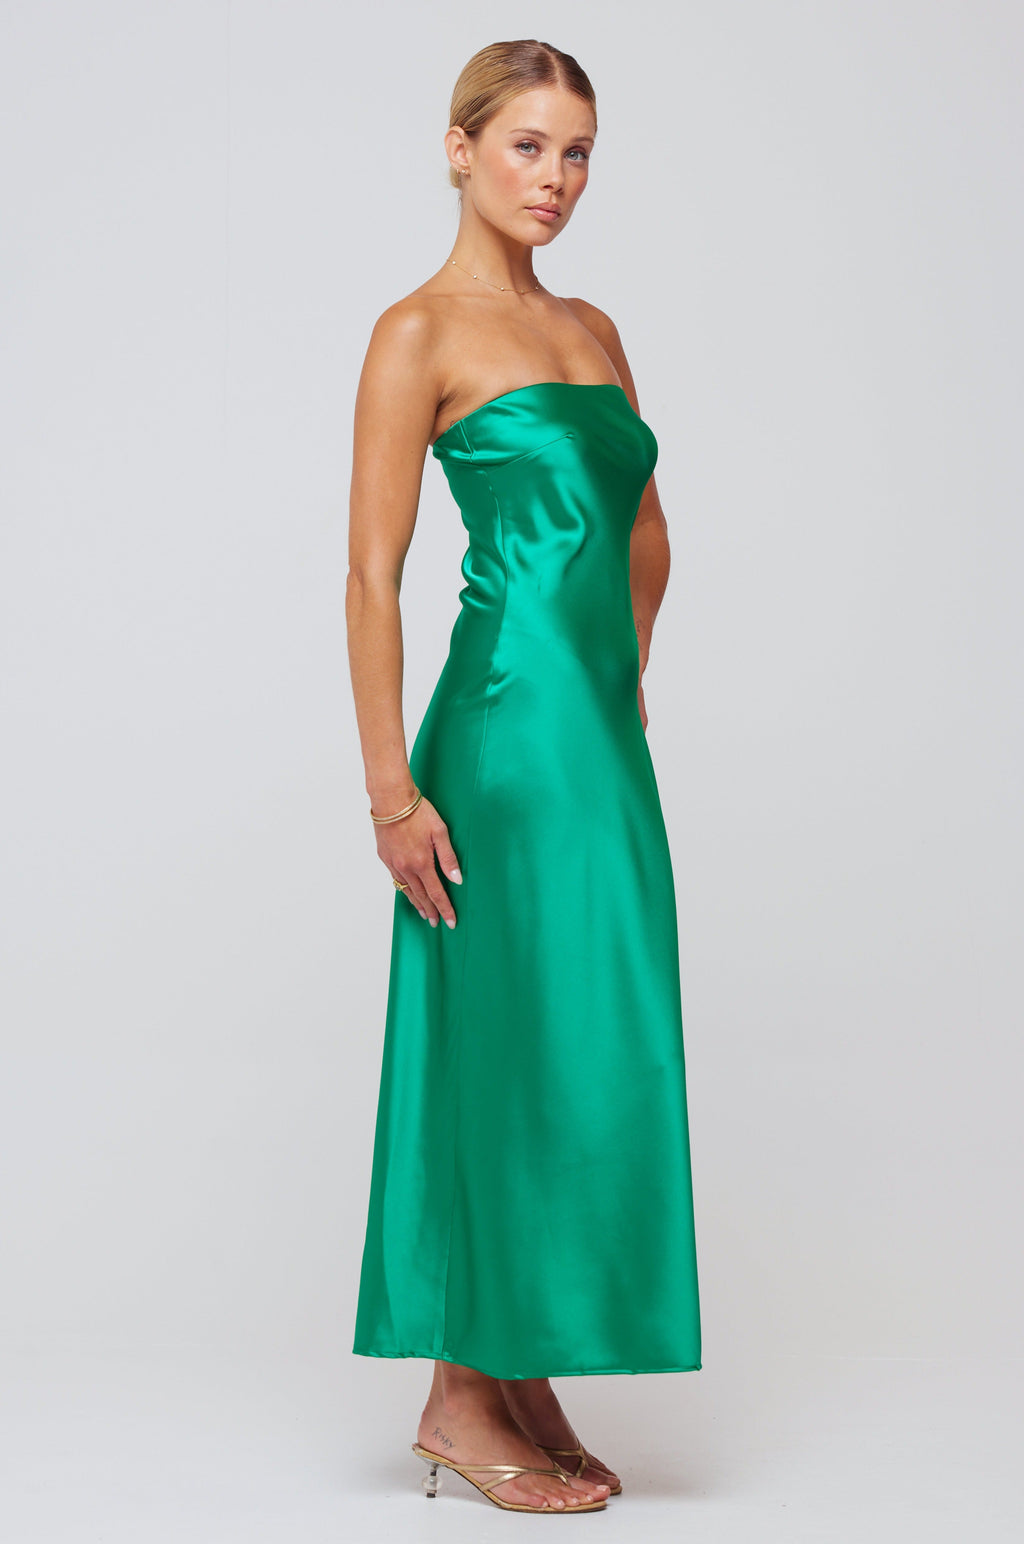 This is an image of Anna Slip in Verde - RESA featuring a model wearing the dress